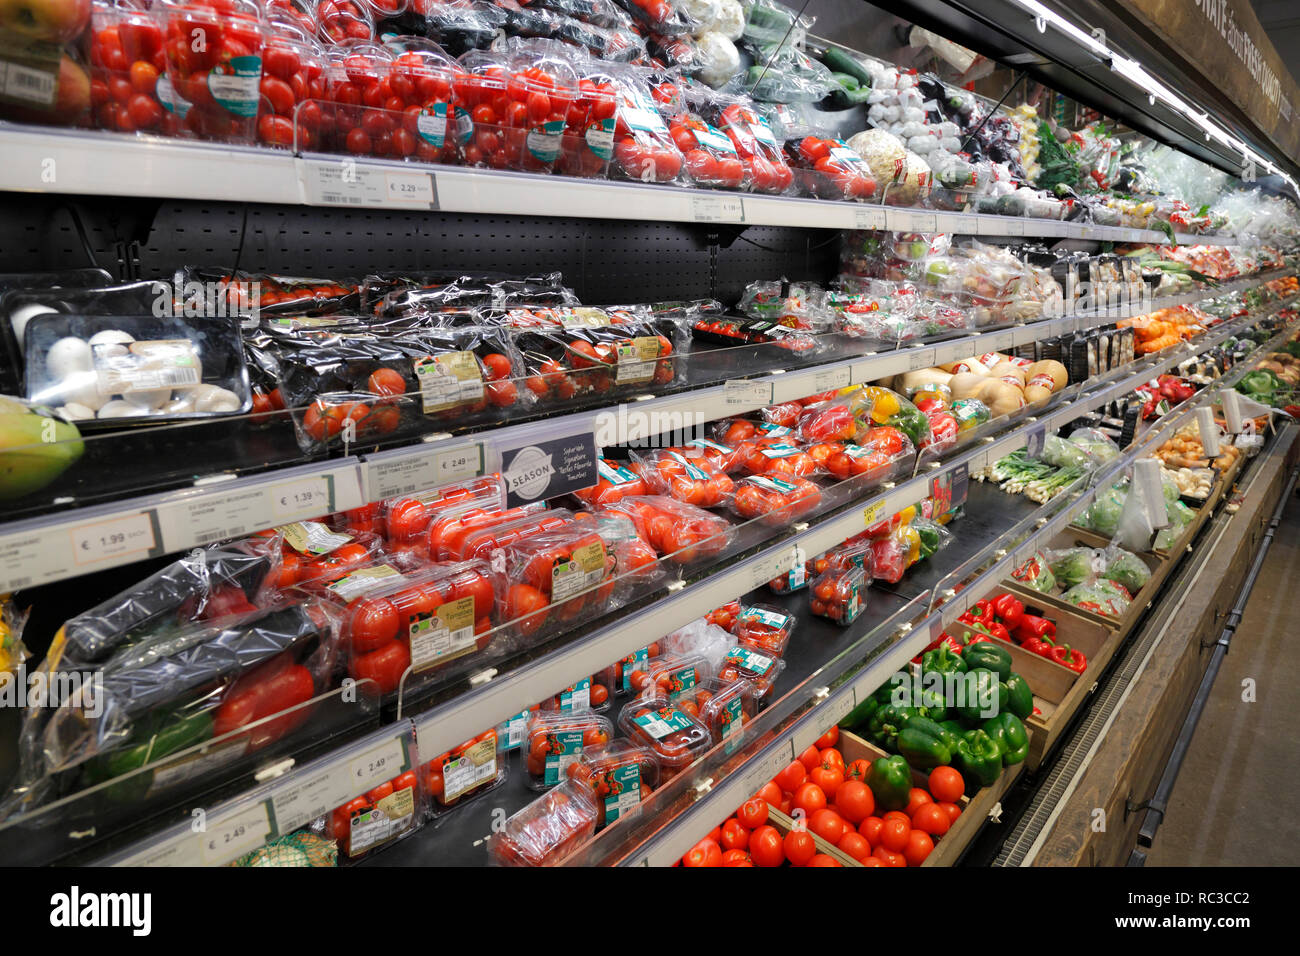 vegetables like tomatoes on a shelf in a supermarket Stock Photo